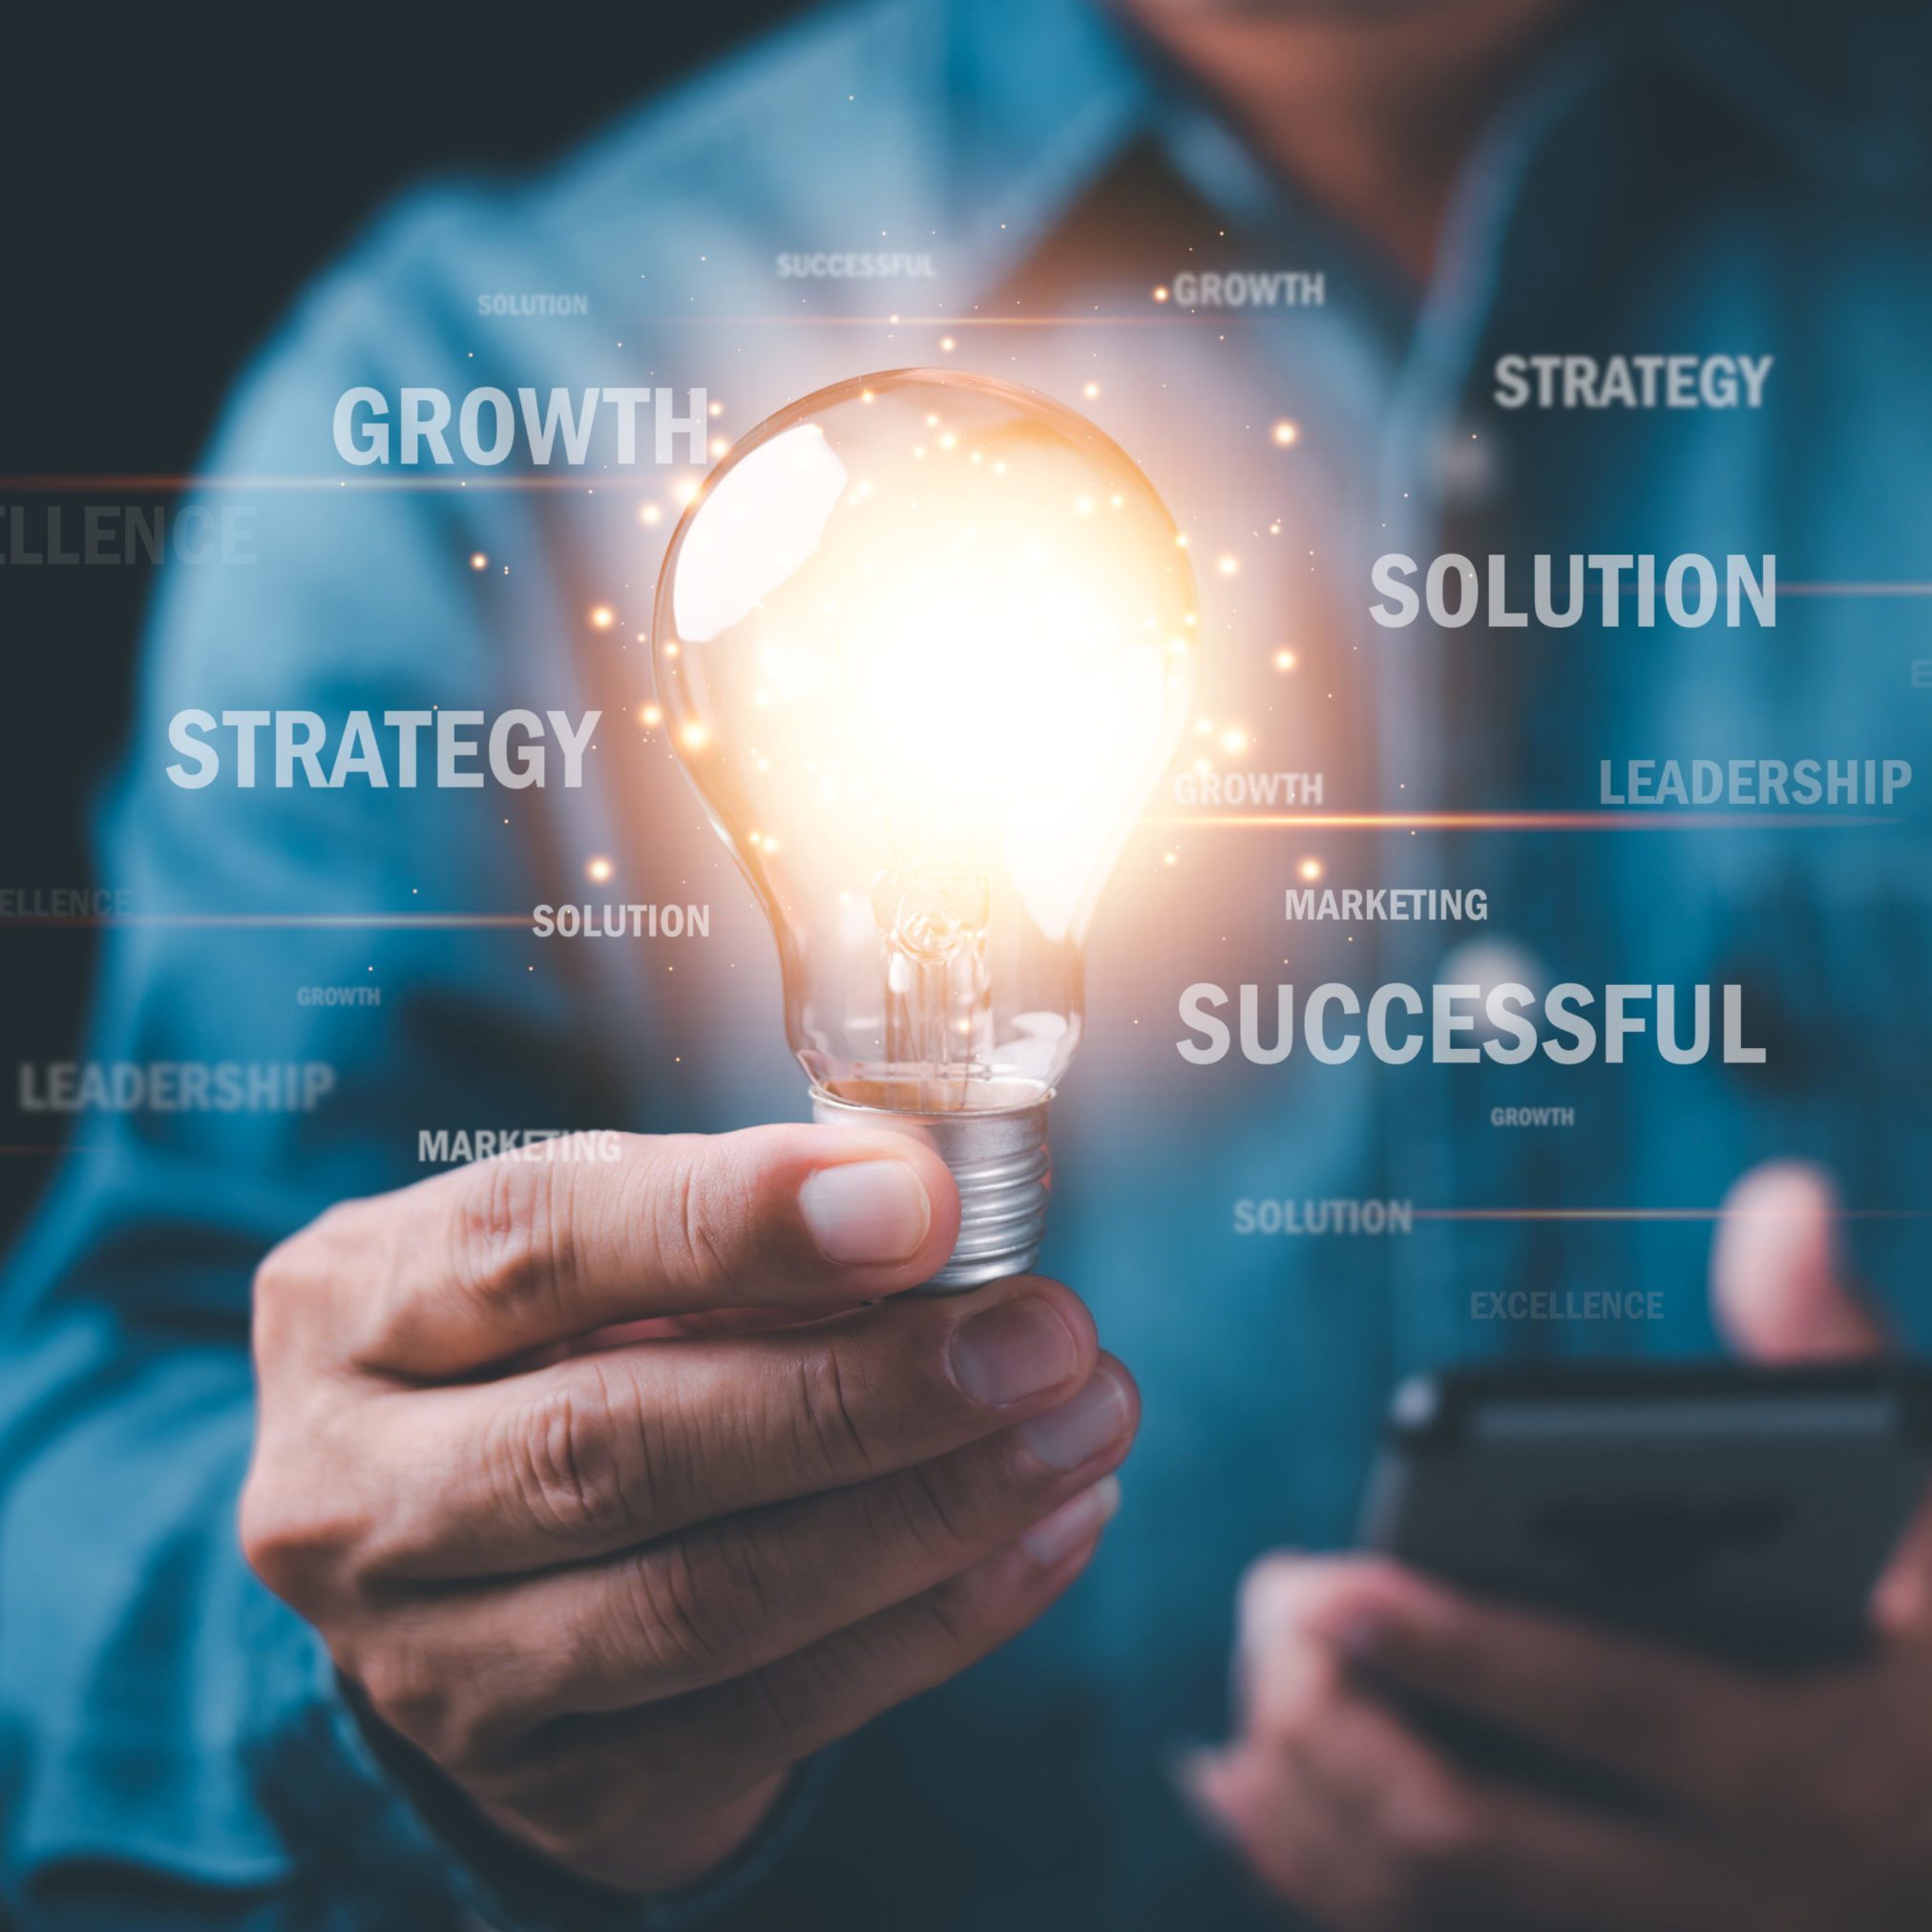 Businessman holding light bulb showing business strategy concept,development concept, business efficiency and growth, financial and economic success goals,Industry Leadership and business competitors